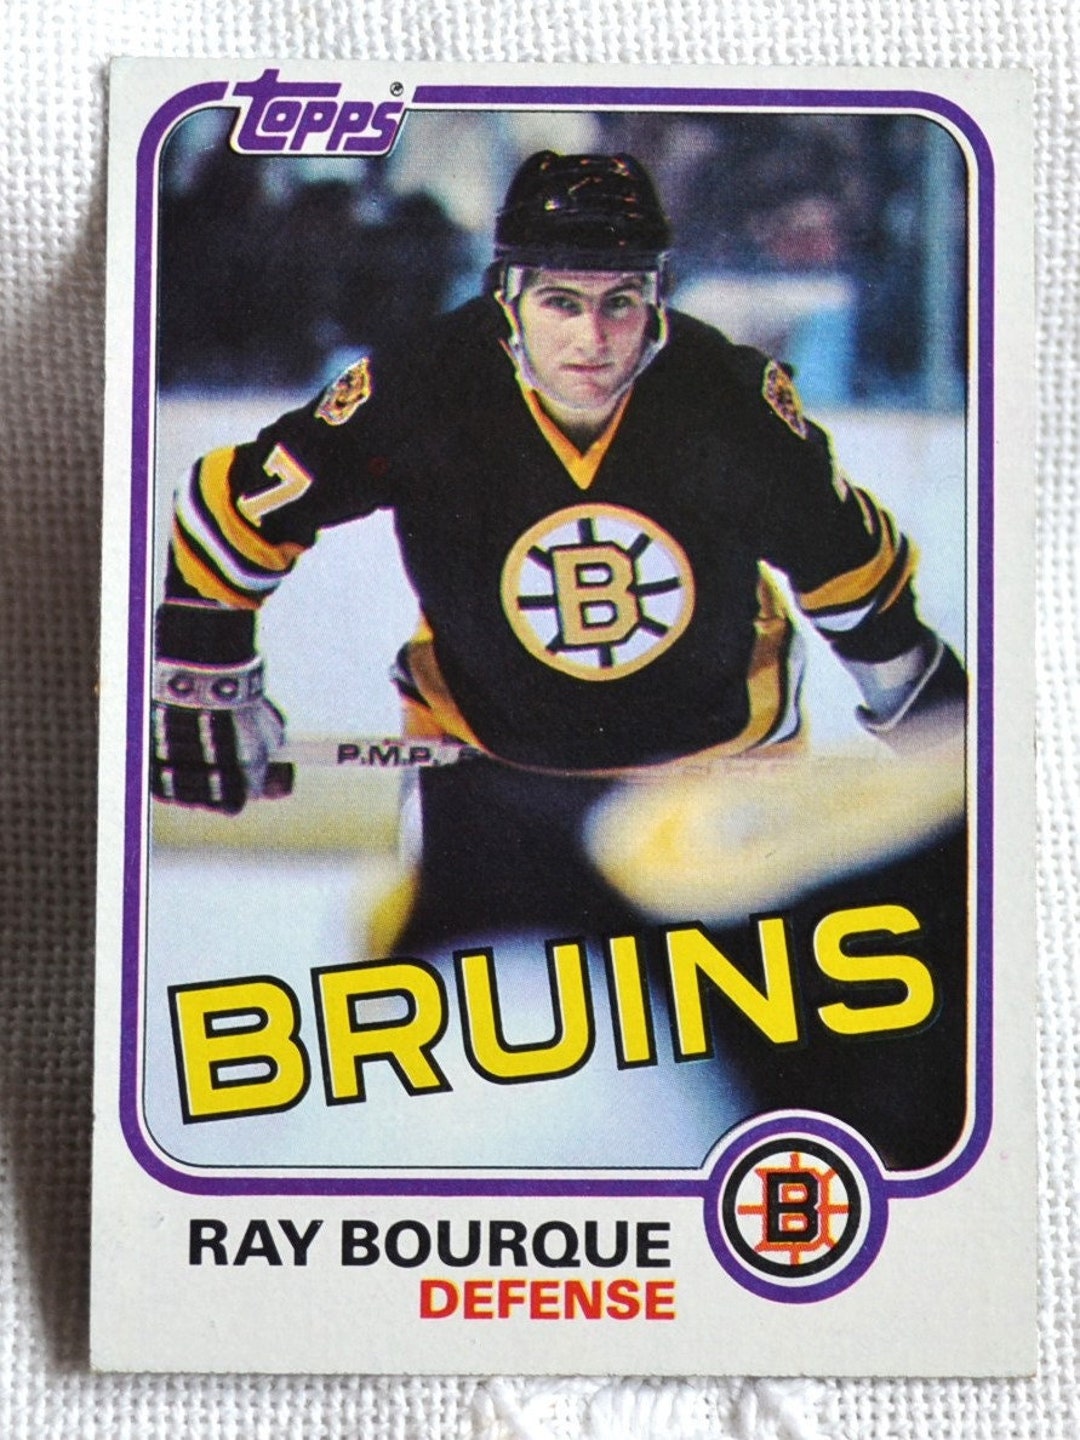 The Life And Career Of Ray Bourque (Story)